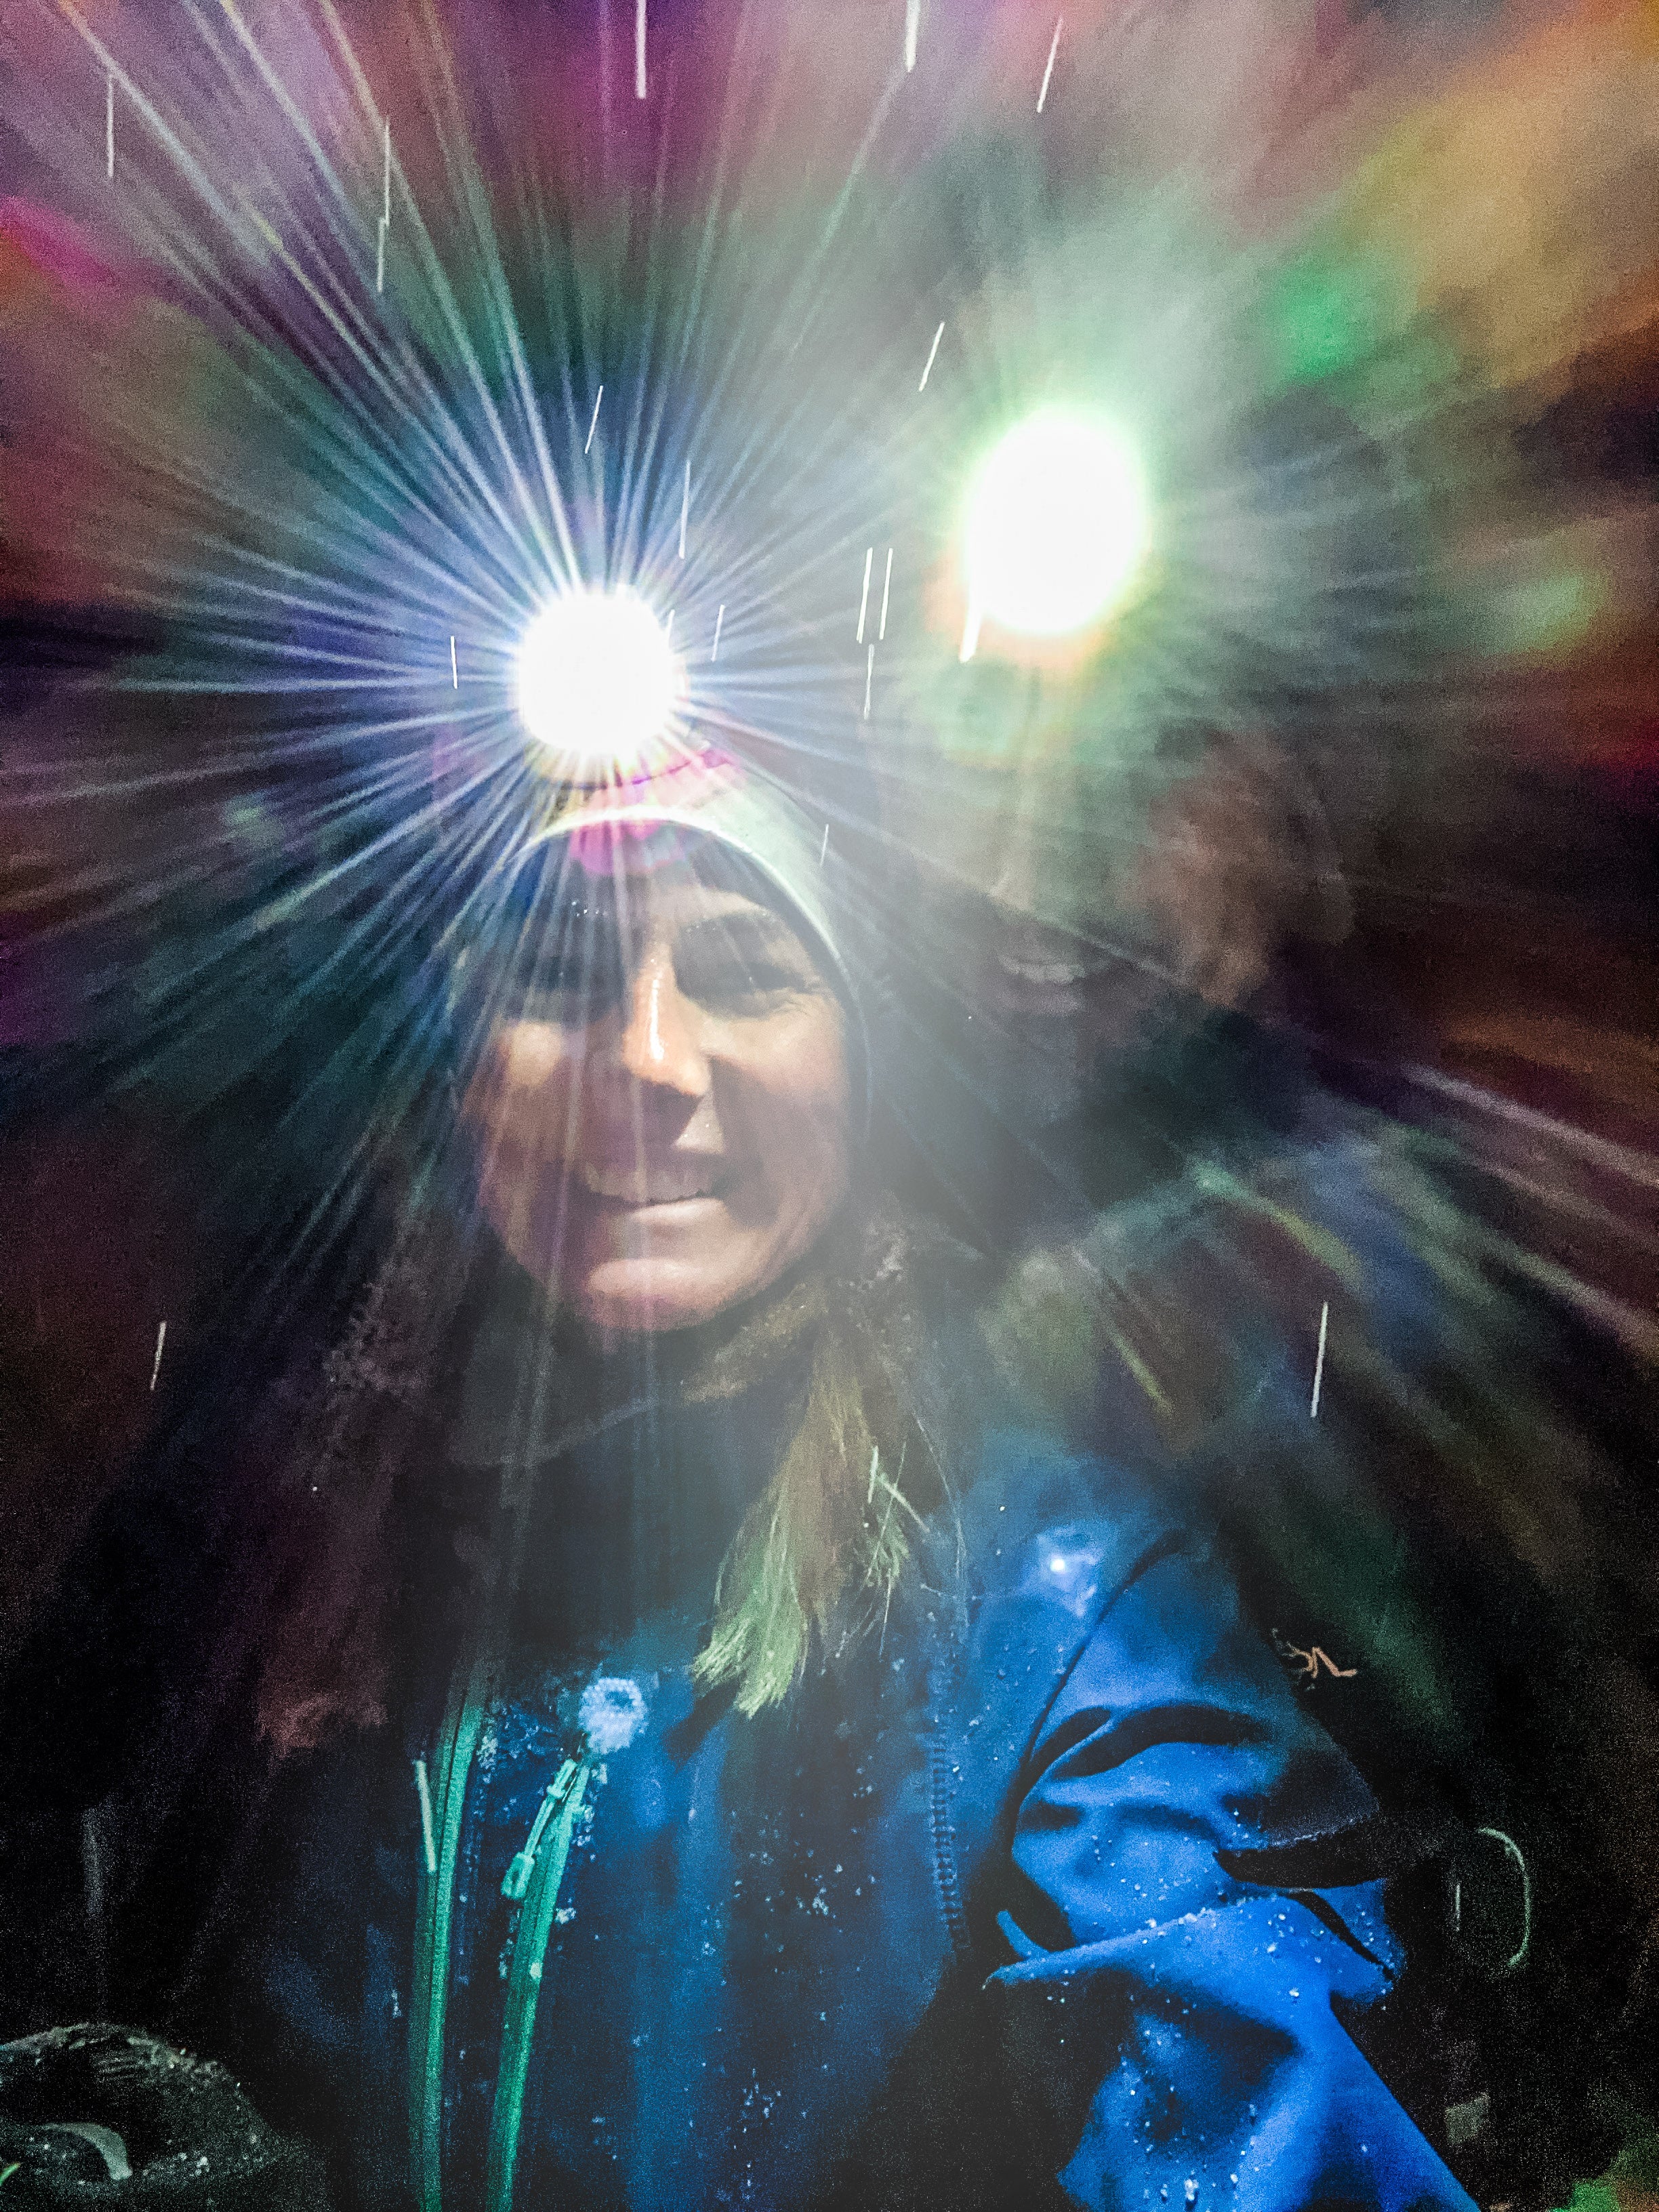 What’s new in headlamps?